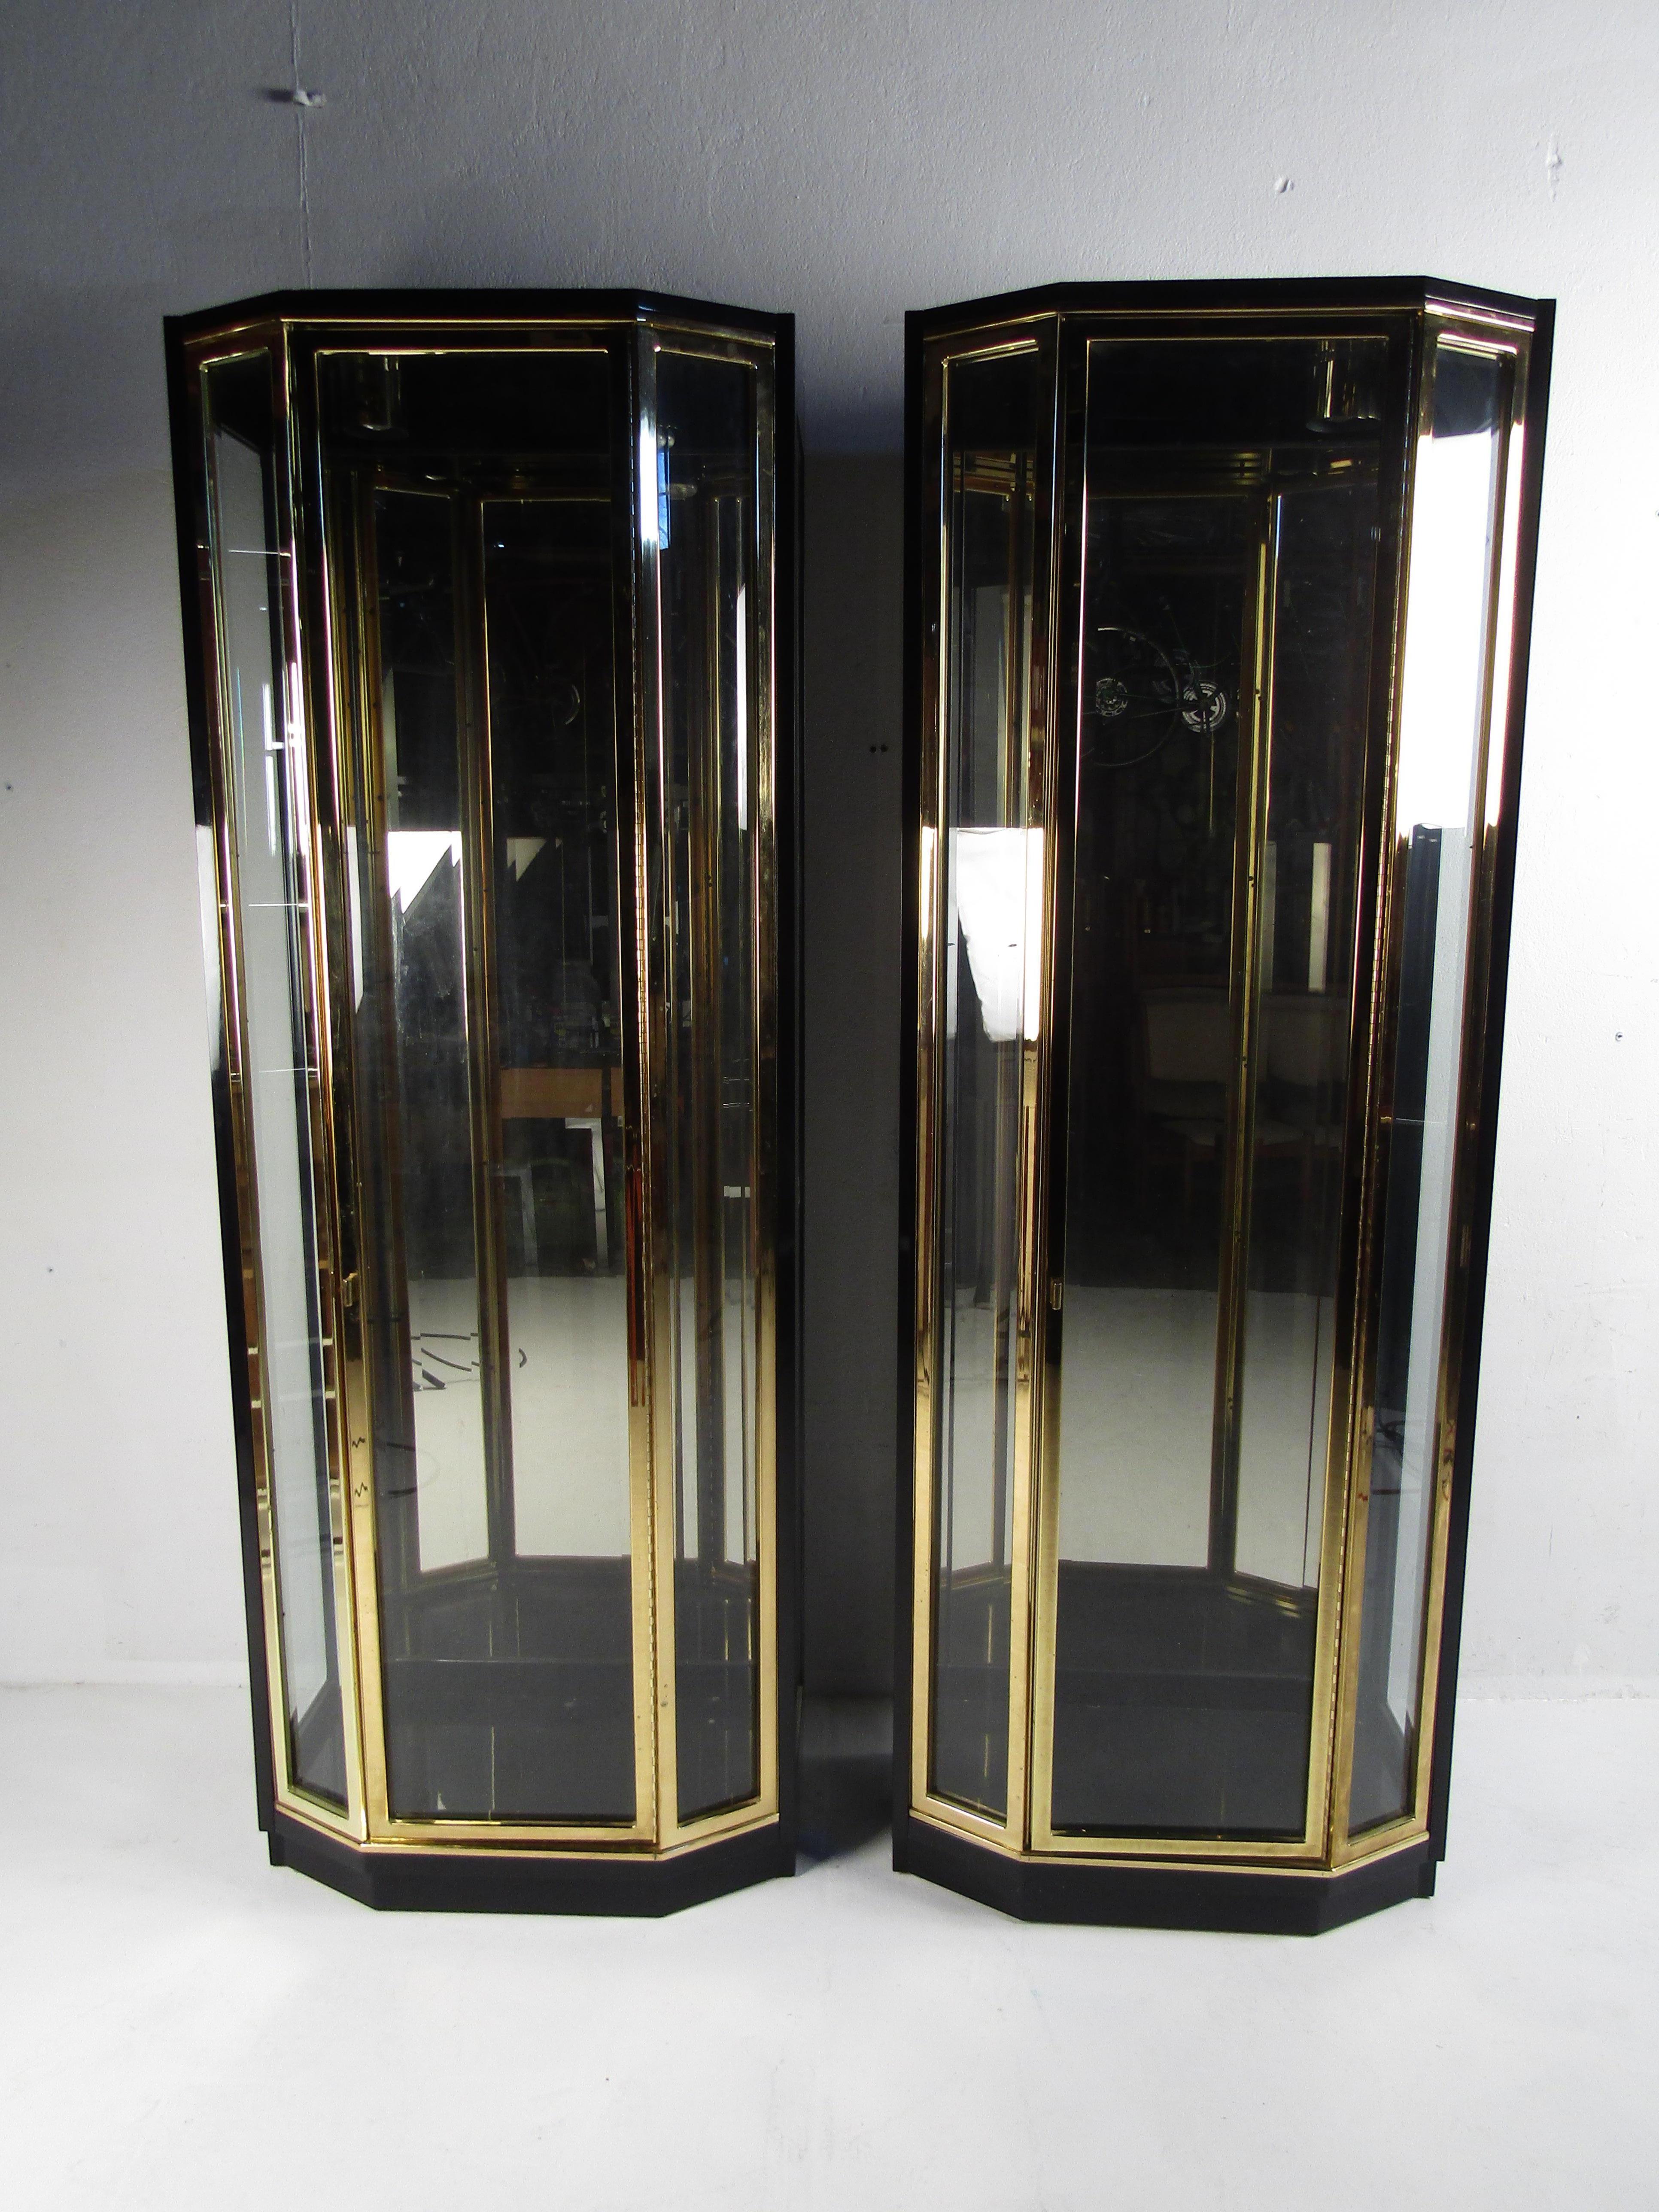 This elegant pair of vintage modern curio cabinets feature two cylindrical lights on the top within a uniquely shaped design. Elegant with brass trim, black lacquered casing, and glass fronts adding to the allure. A tall cabinet door opens to unveil